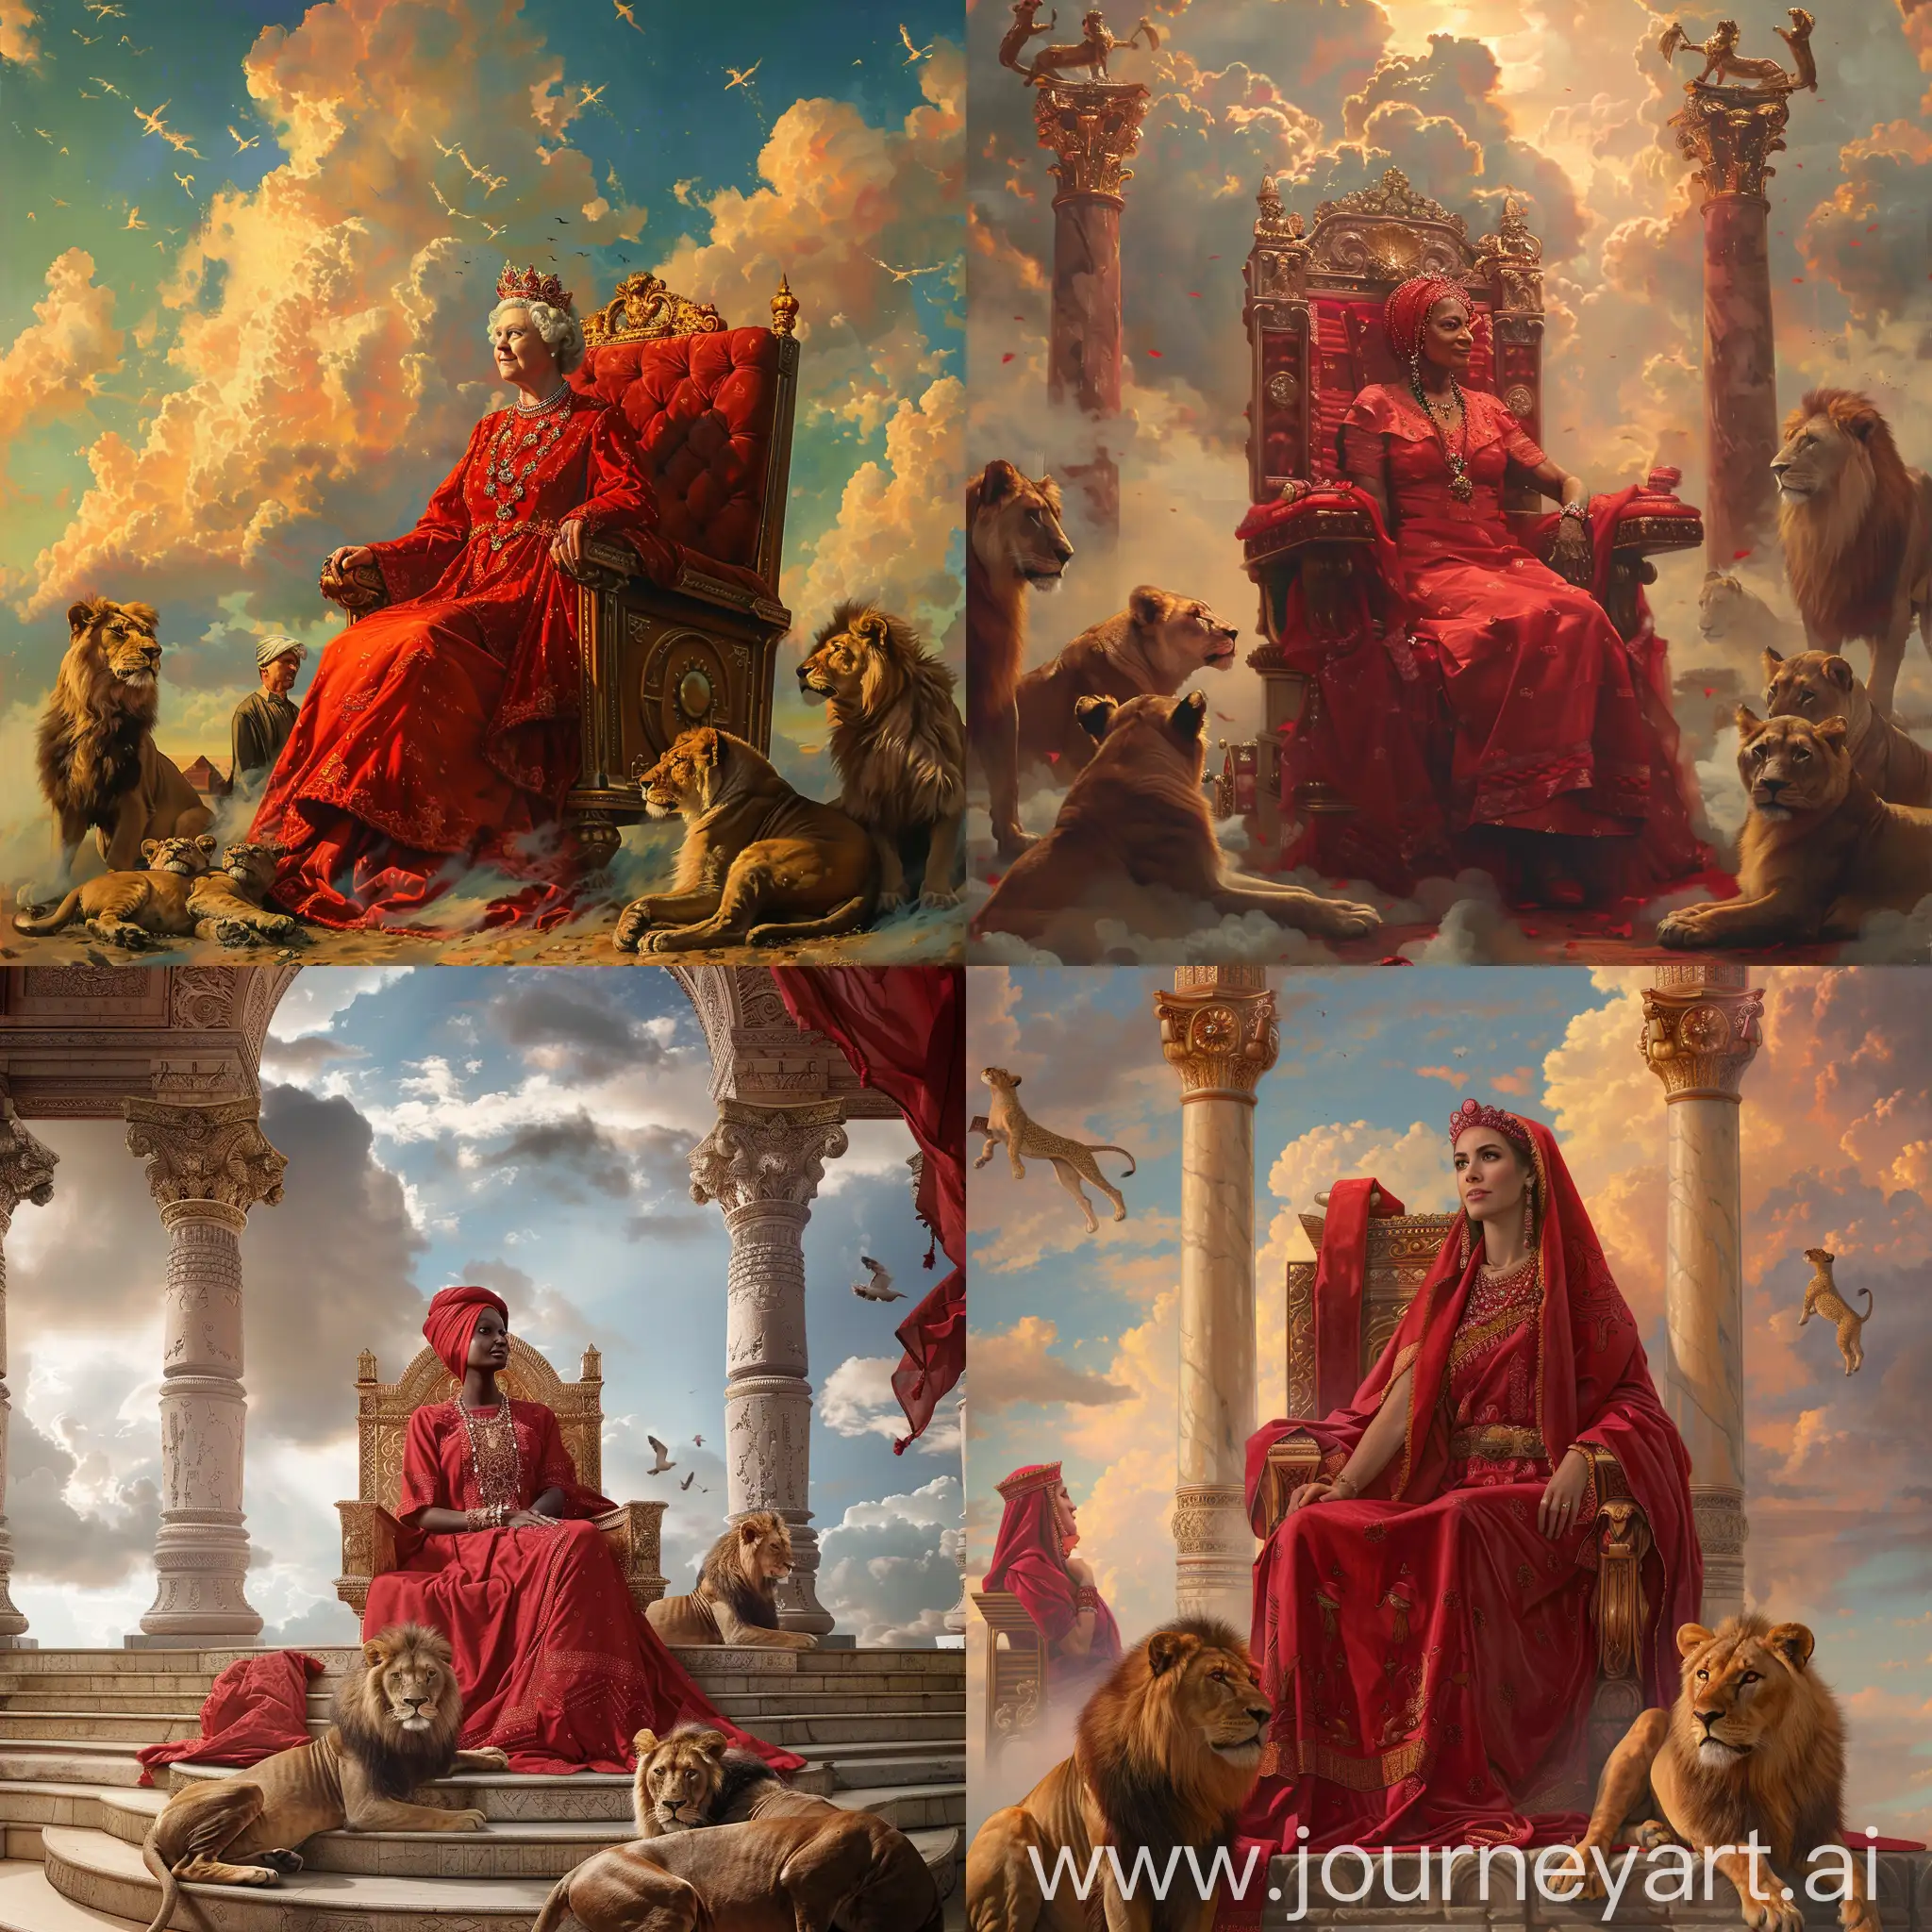 Sky-Kingdom-Queen-in-Red-Traditional-Attire-with-Lions-and-Ministers